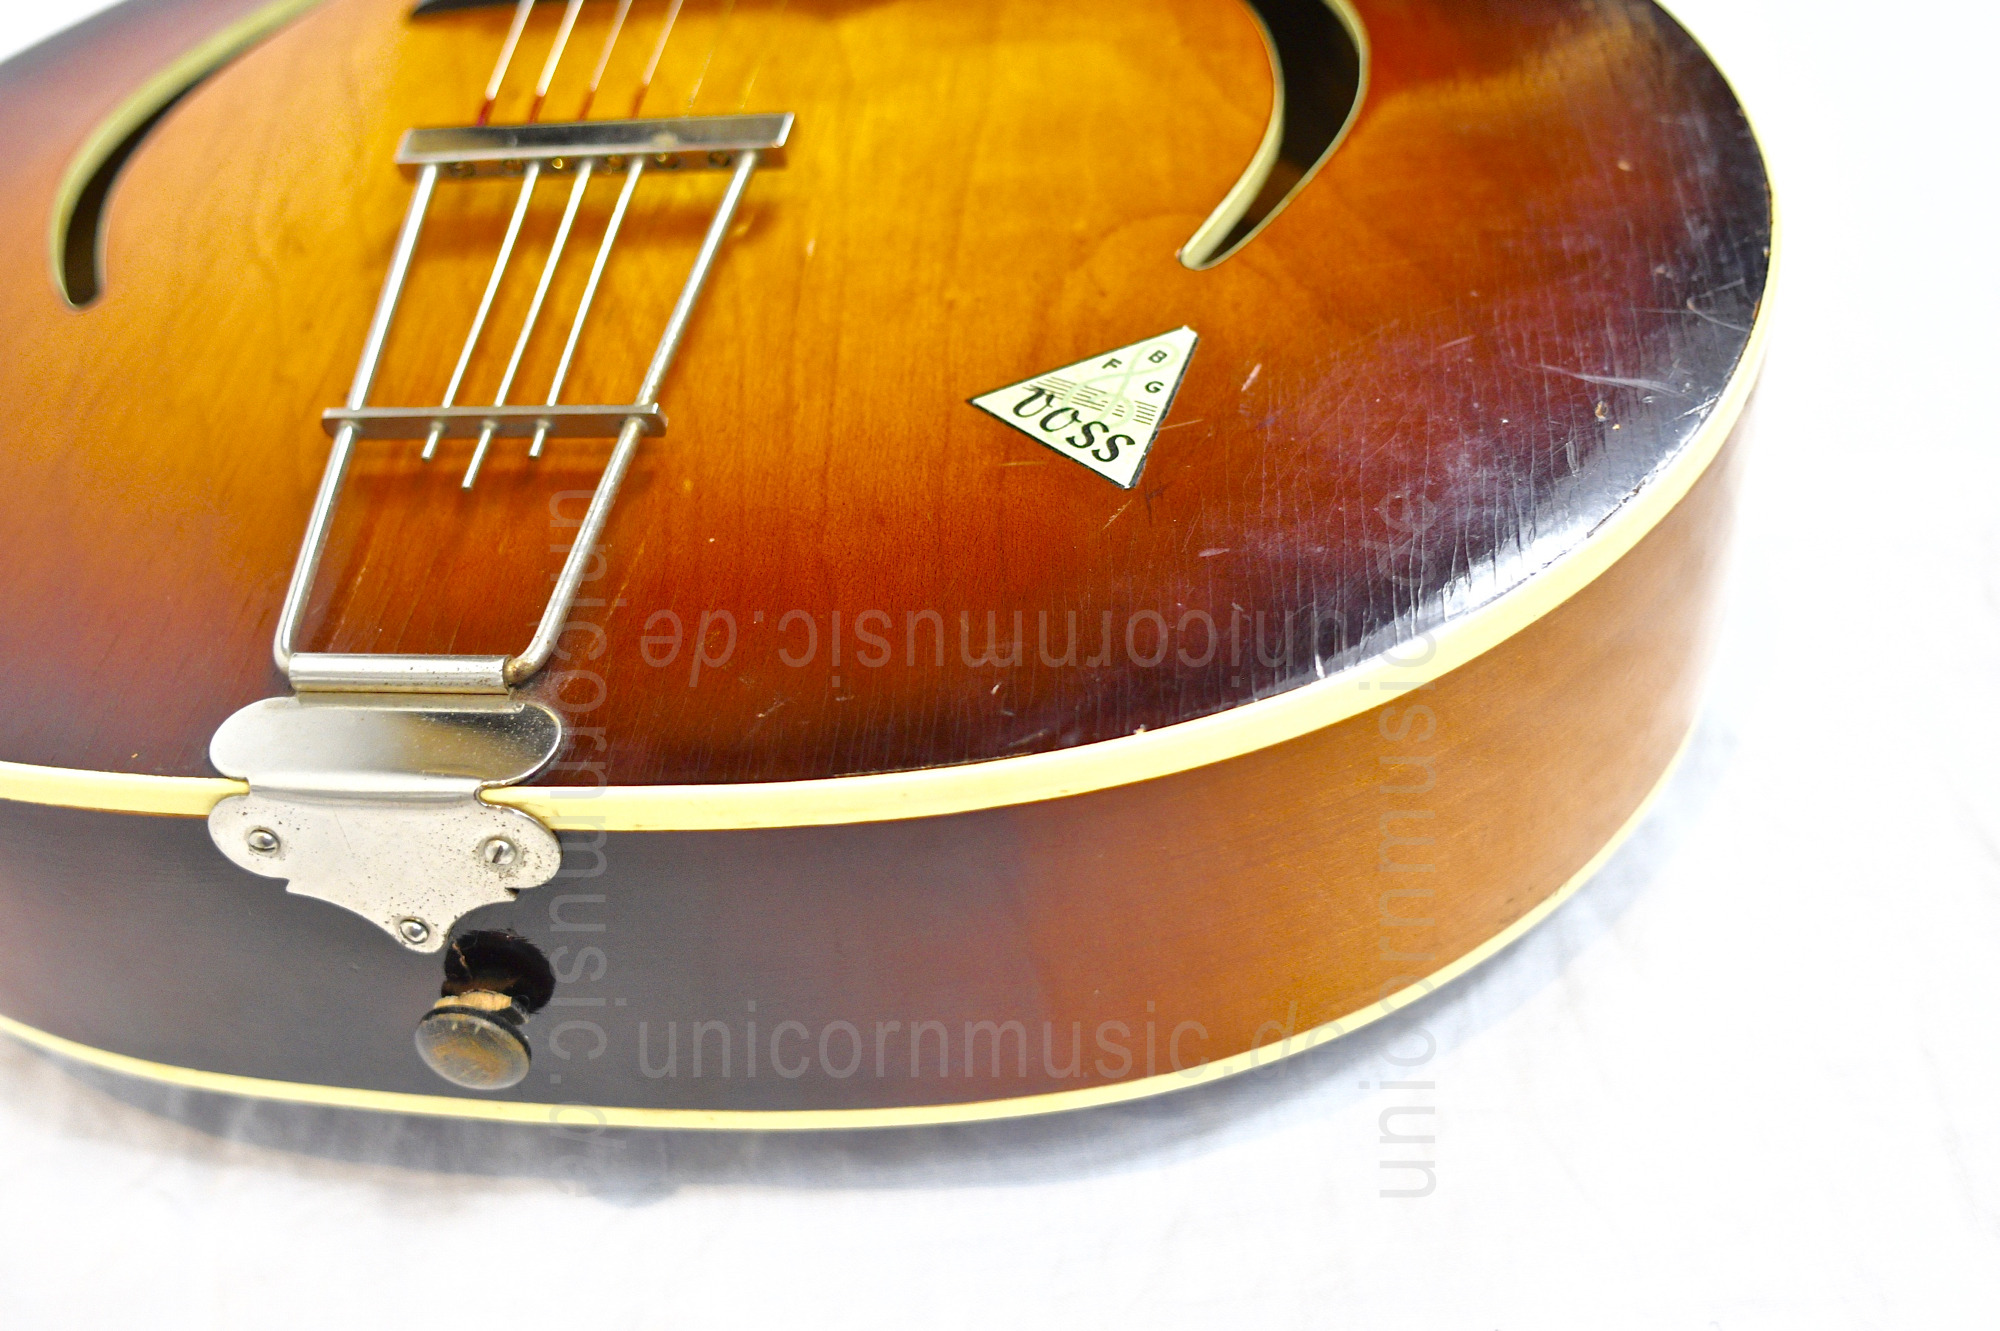 to article description / price 115 - Voss Archtop